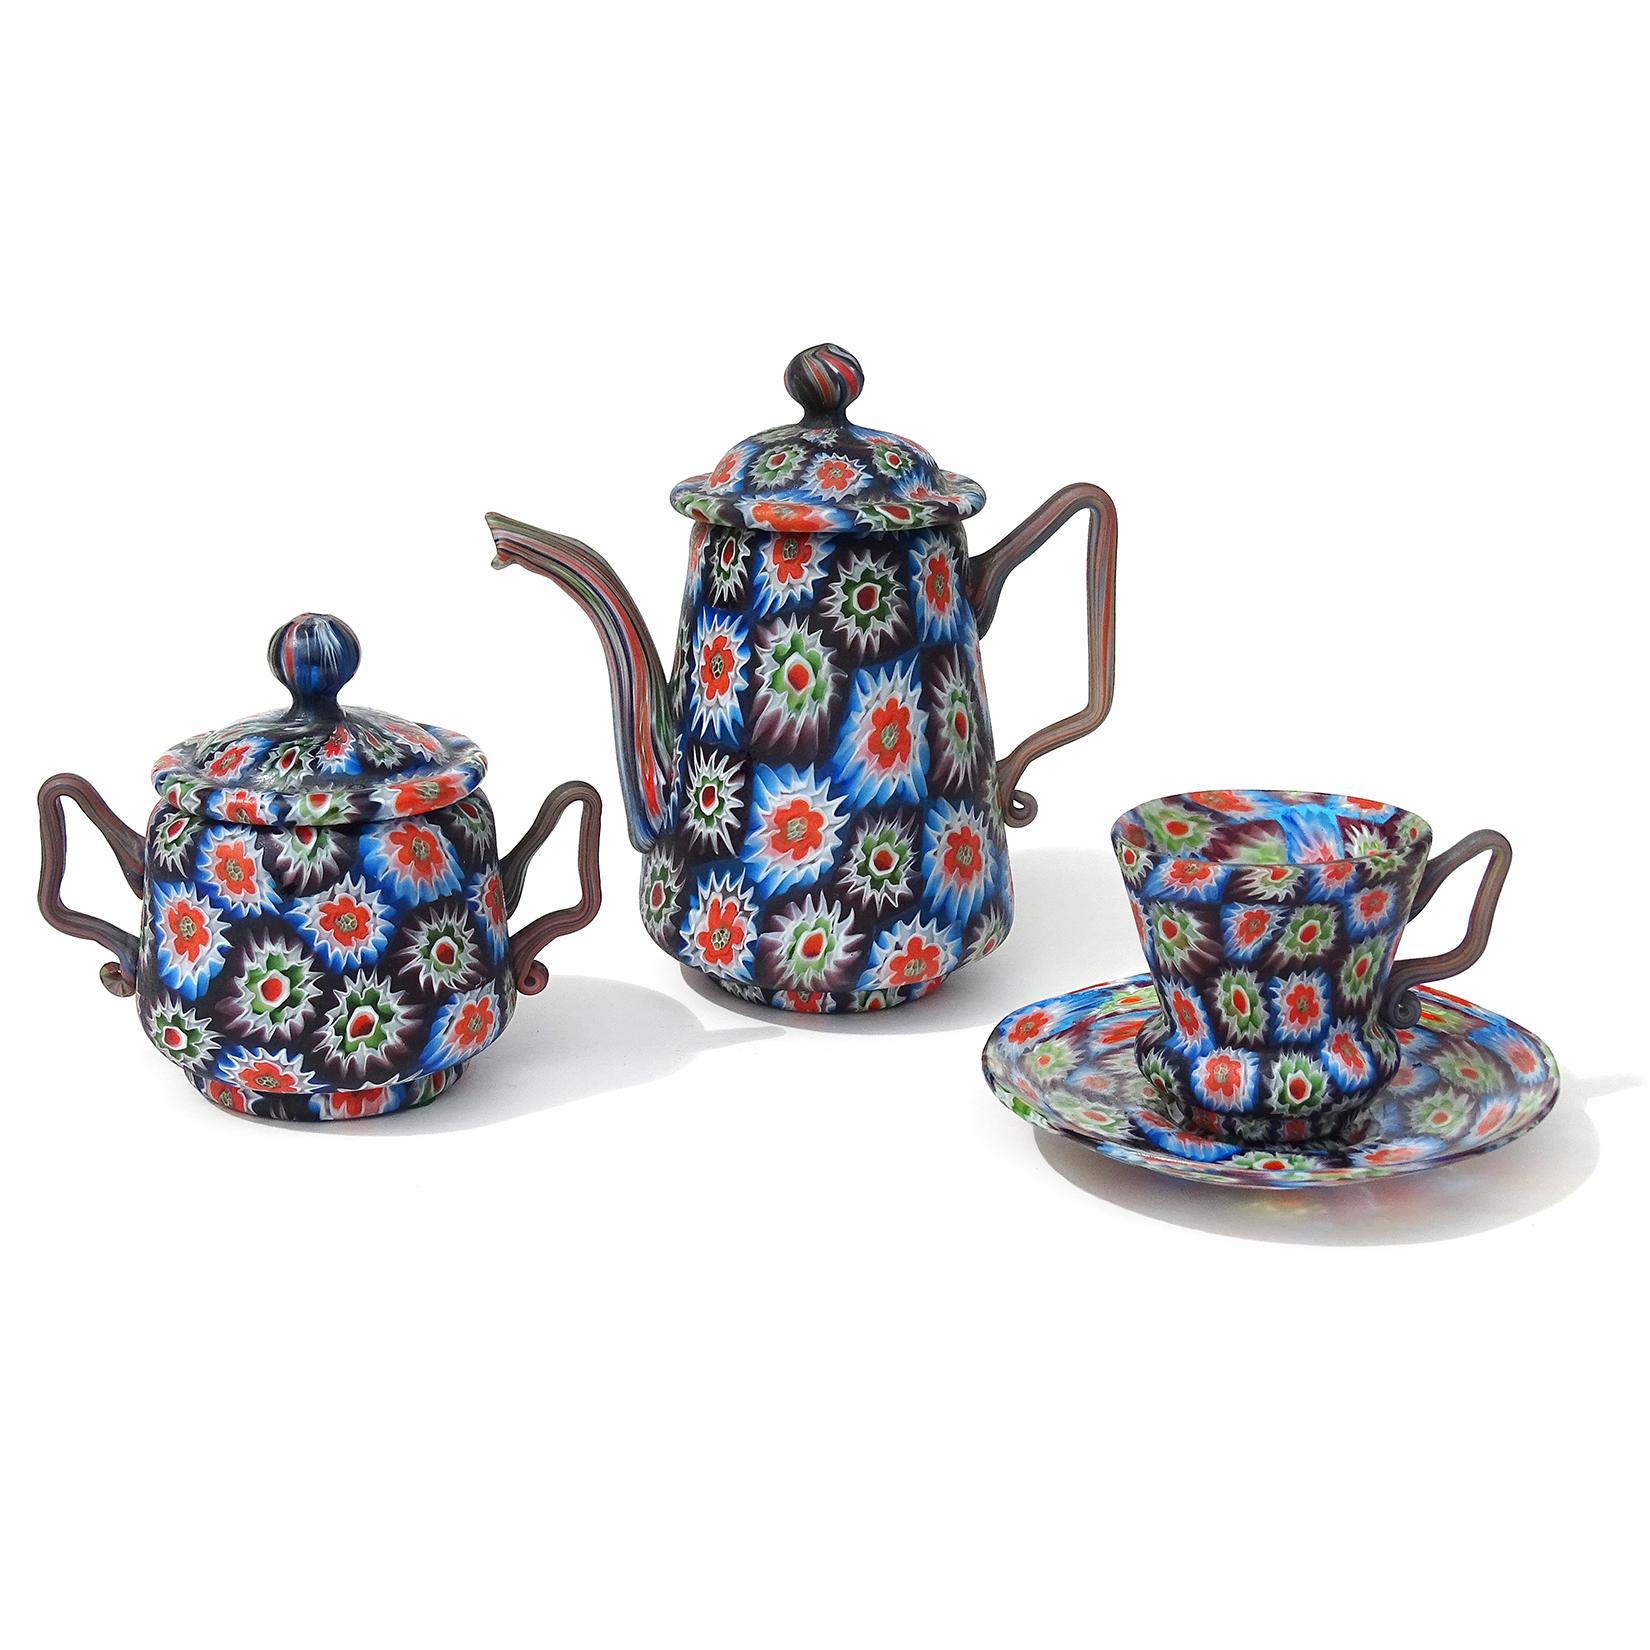 Beautiful antique Murano hand blown millefiori flower mosaic Italian art glass teapot, sugar bowl, with teacup and saucer set. Documented to the Fratelli Toso Company, circa 1910-1930. Bold design, in an almost checkered pattern on each piece. The